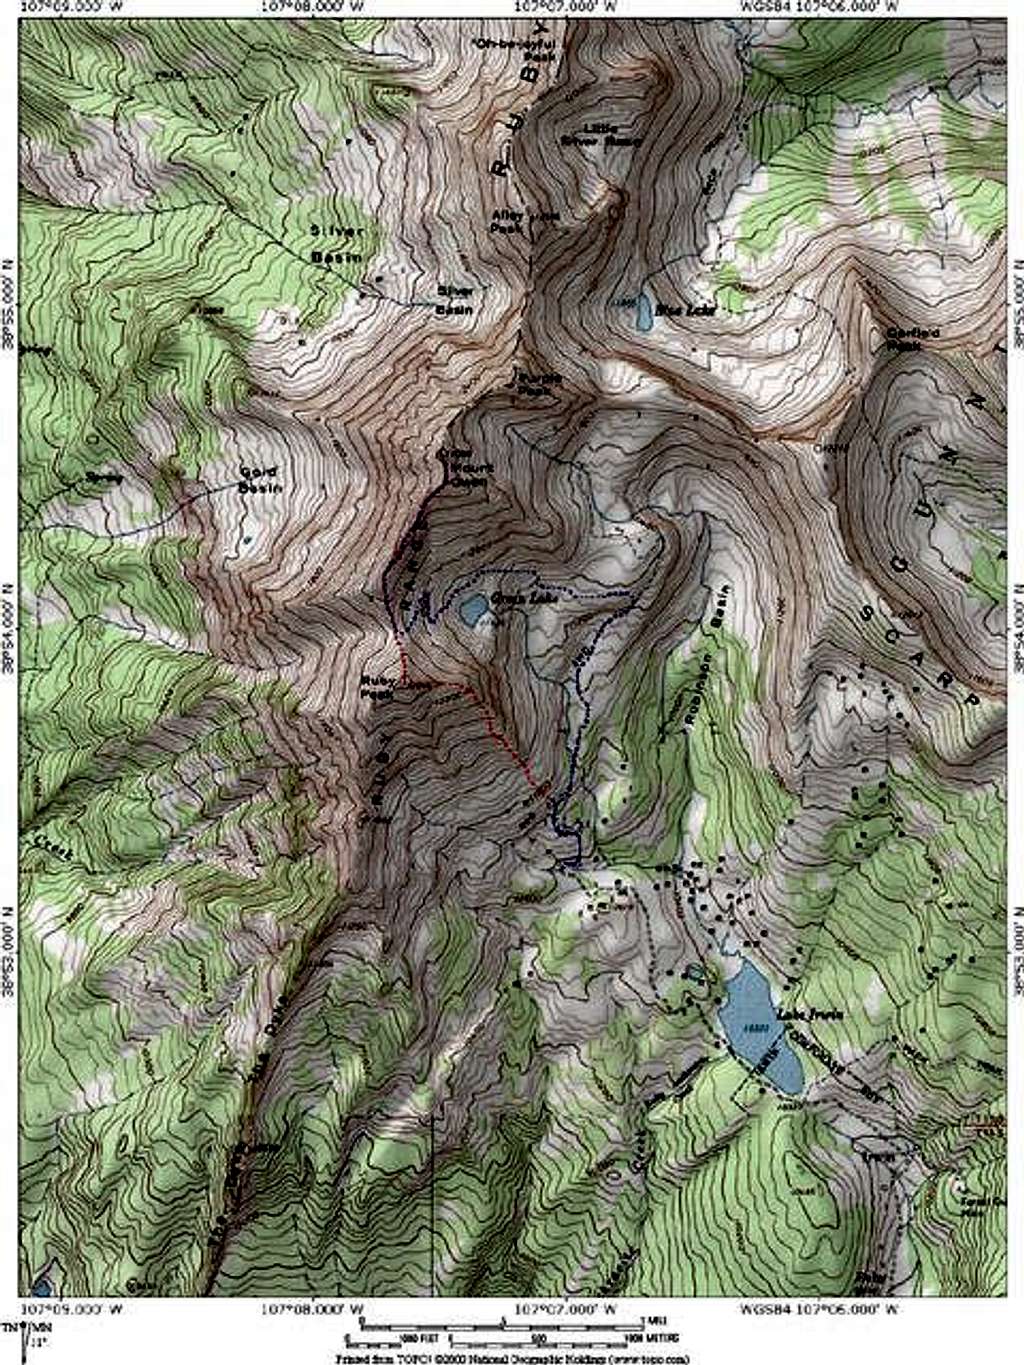 This is a Topo! map made with...